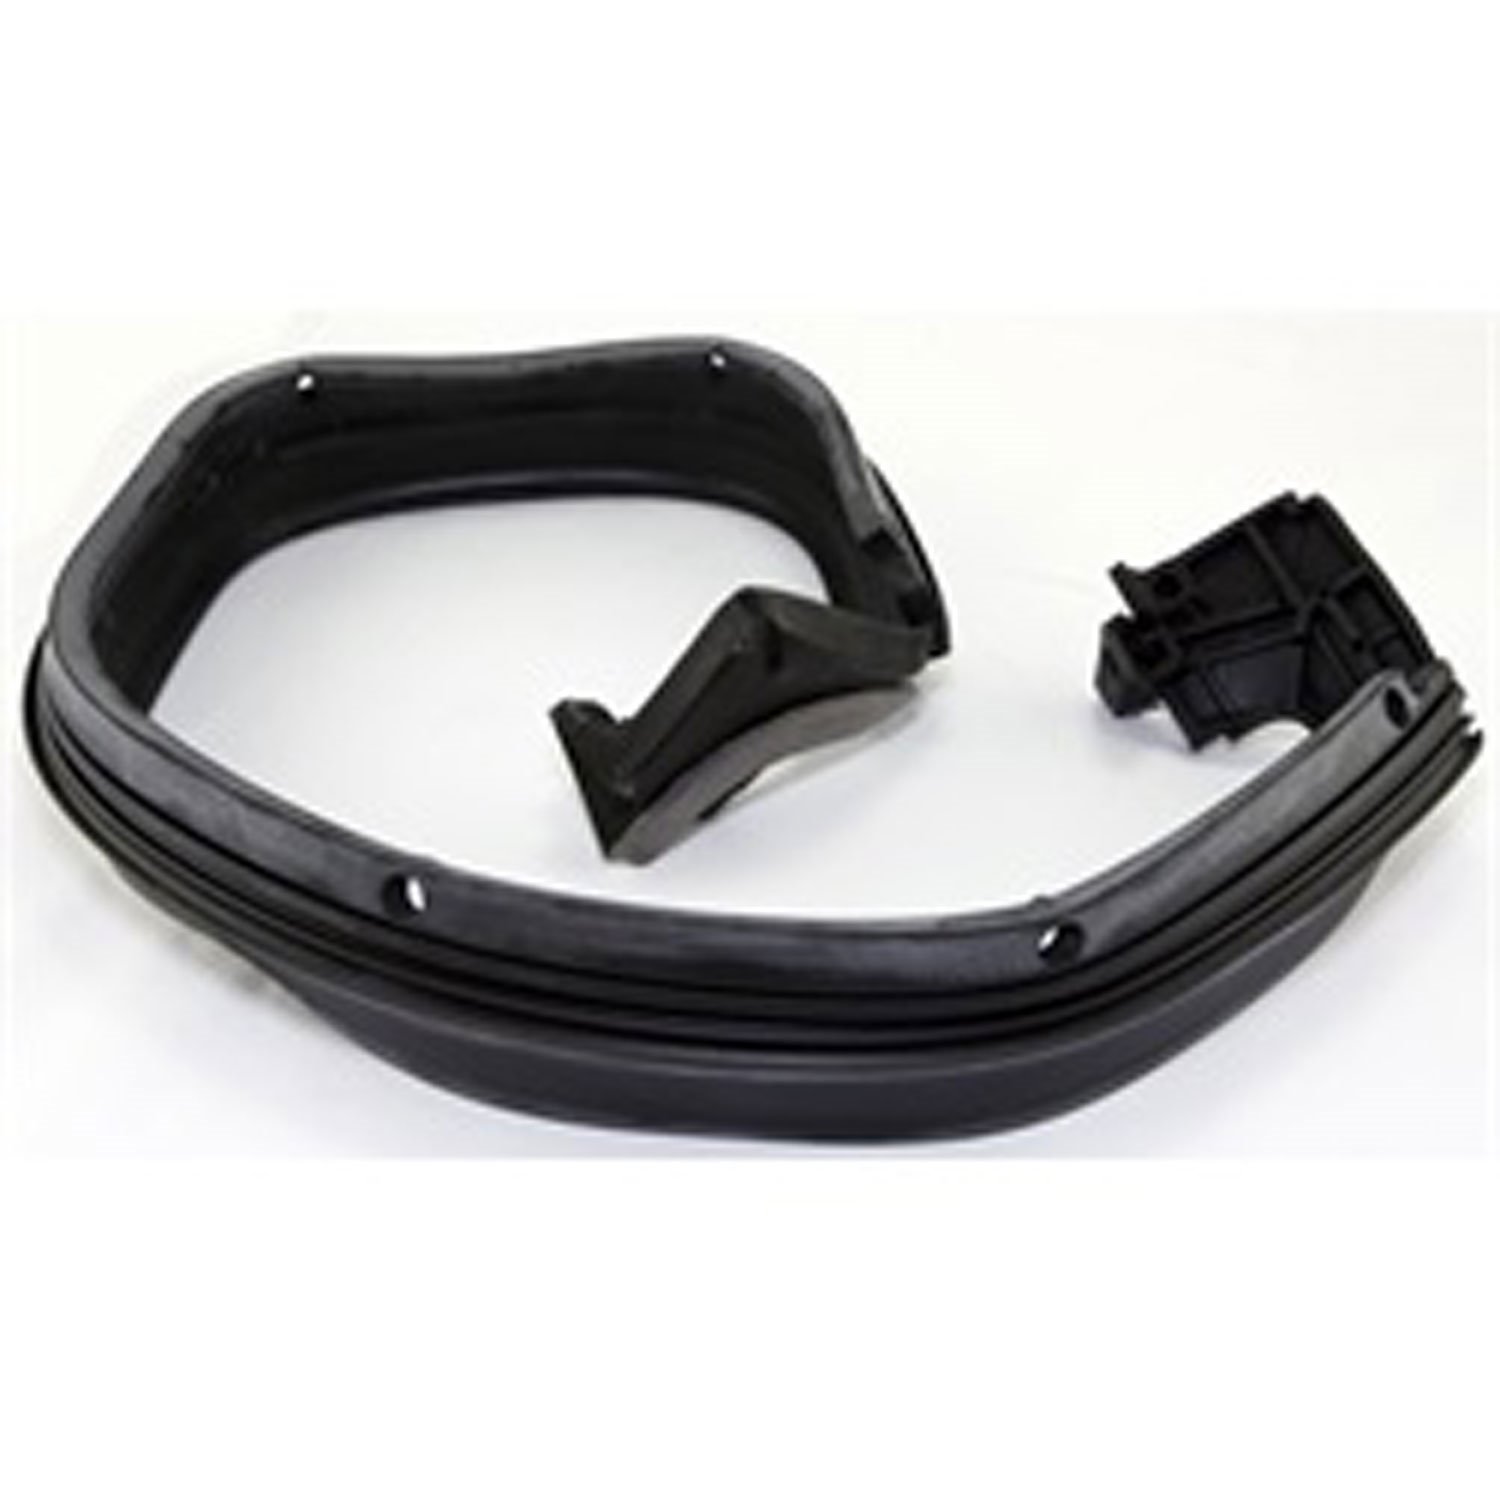 Replacement cowl seal from Omix-ADA, Fits 97-02 Jeep Wrangler TJ